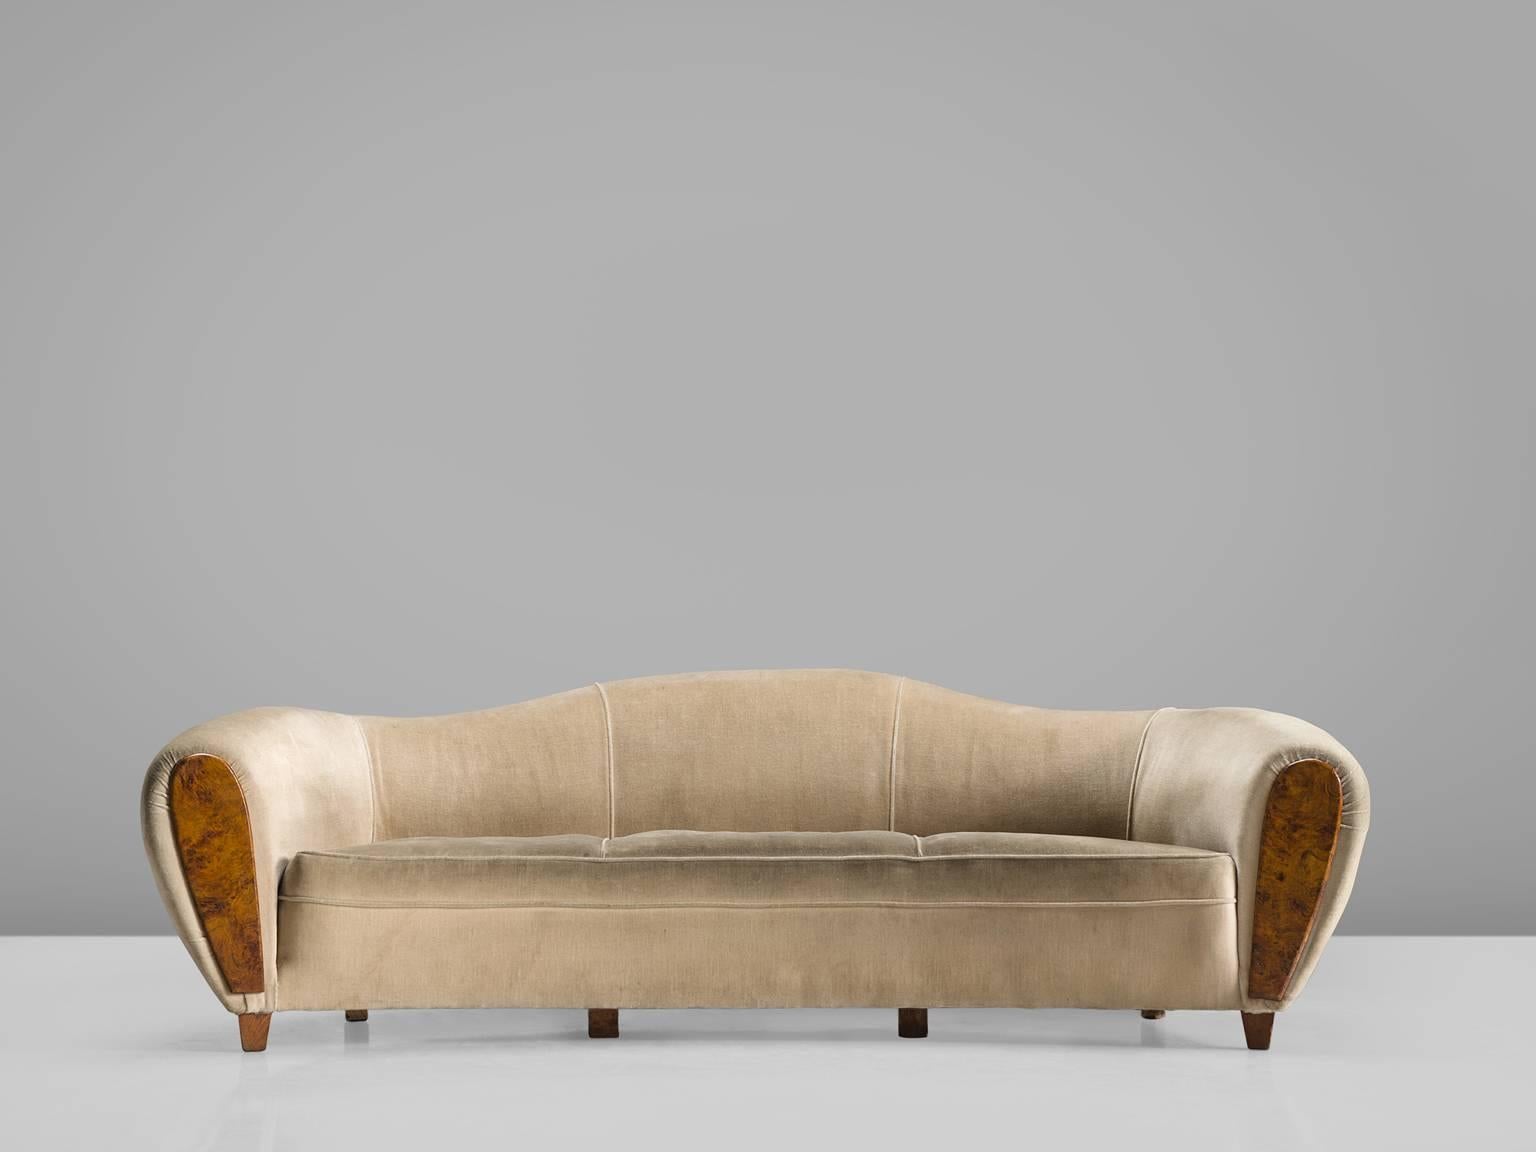 Sofa, white to beige fabric and burl wood, France, 1940s.

This voluptuous sofa is executed with burl and and a velvet like fabric. The sofa has a curved back and very thick and wide armrests that are covered with a burl front. The sofa has small